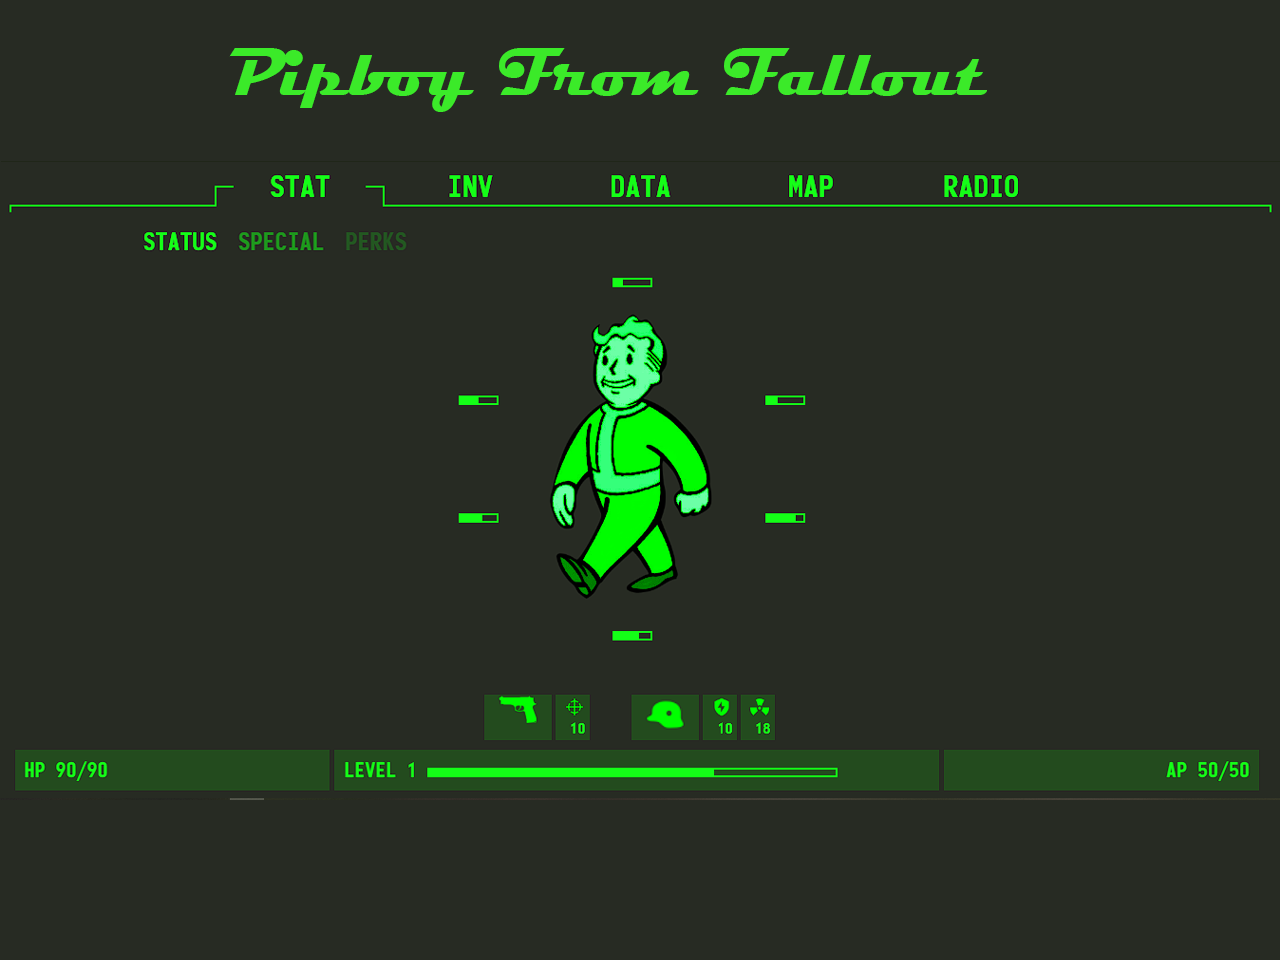 Pipboy from fallout 4 with source code